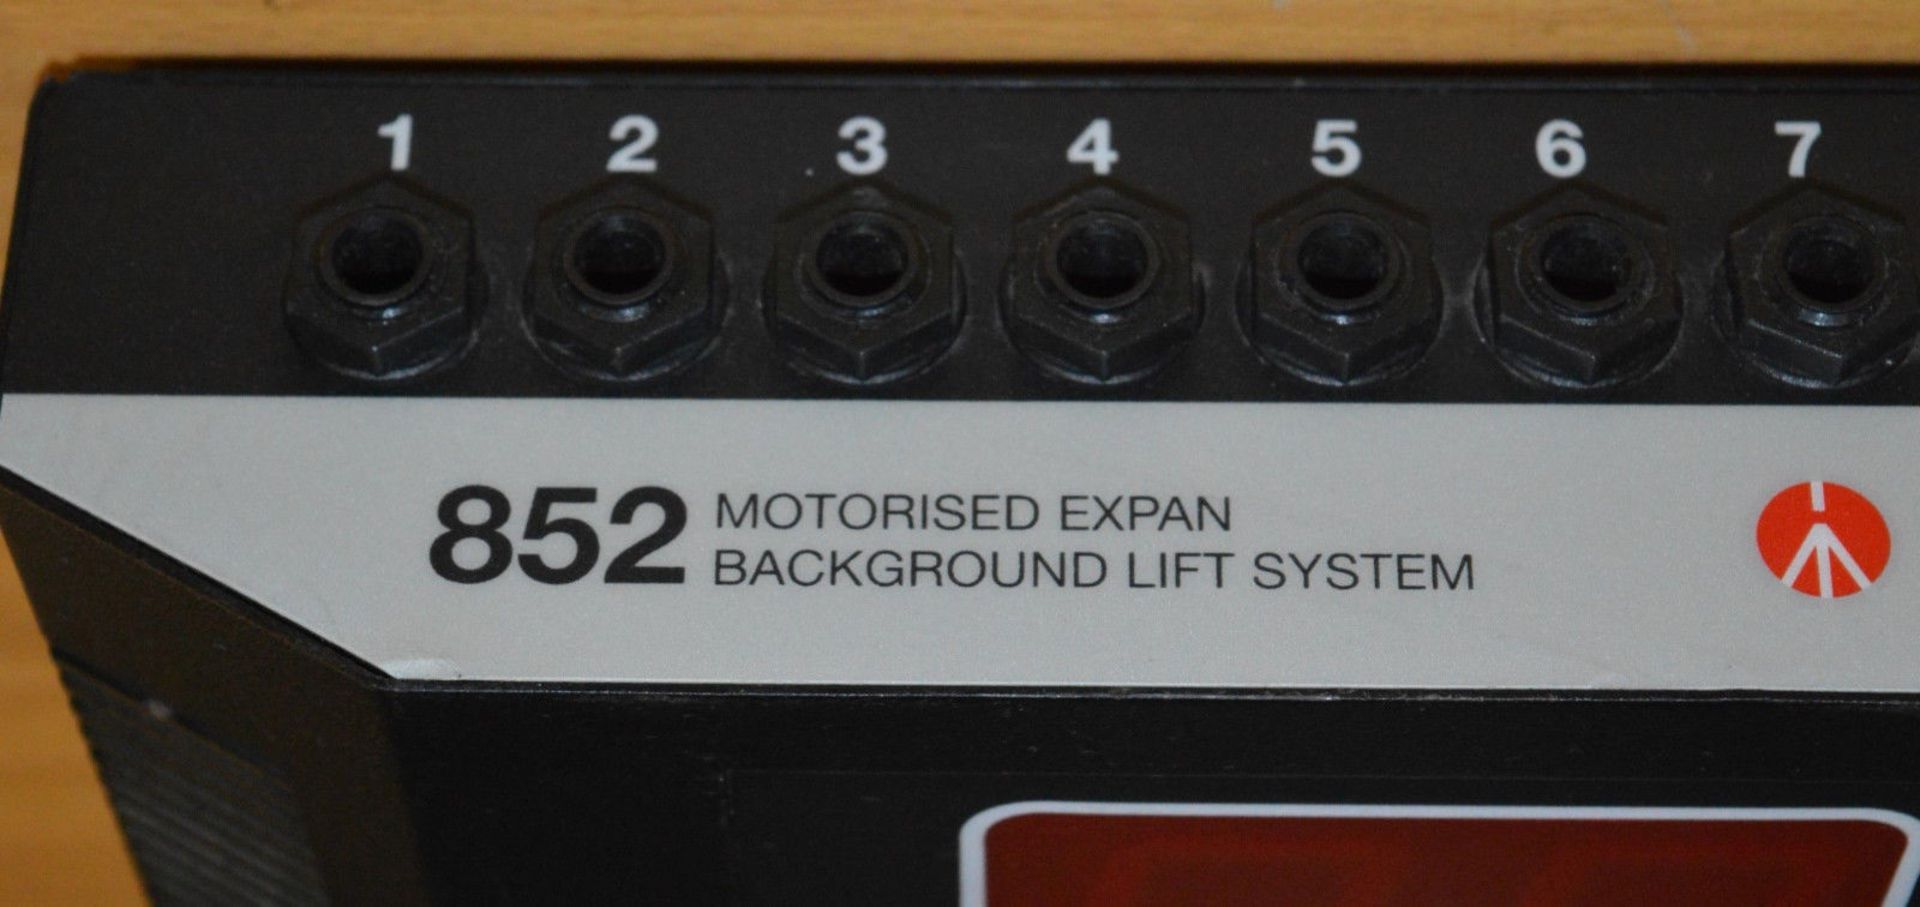 1 x Manfrotto 852 Motorised Expan Photography Background Lift System - Ideal for use in - Image 4 of 6